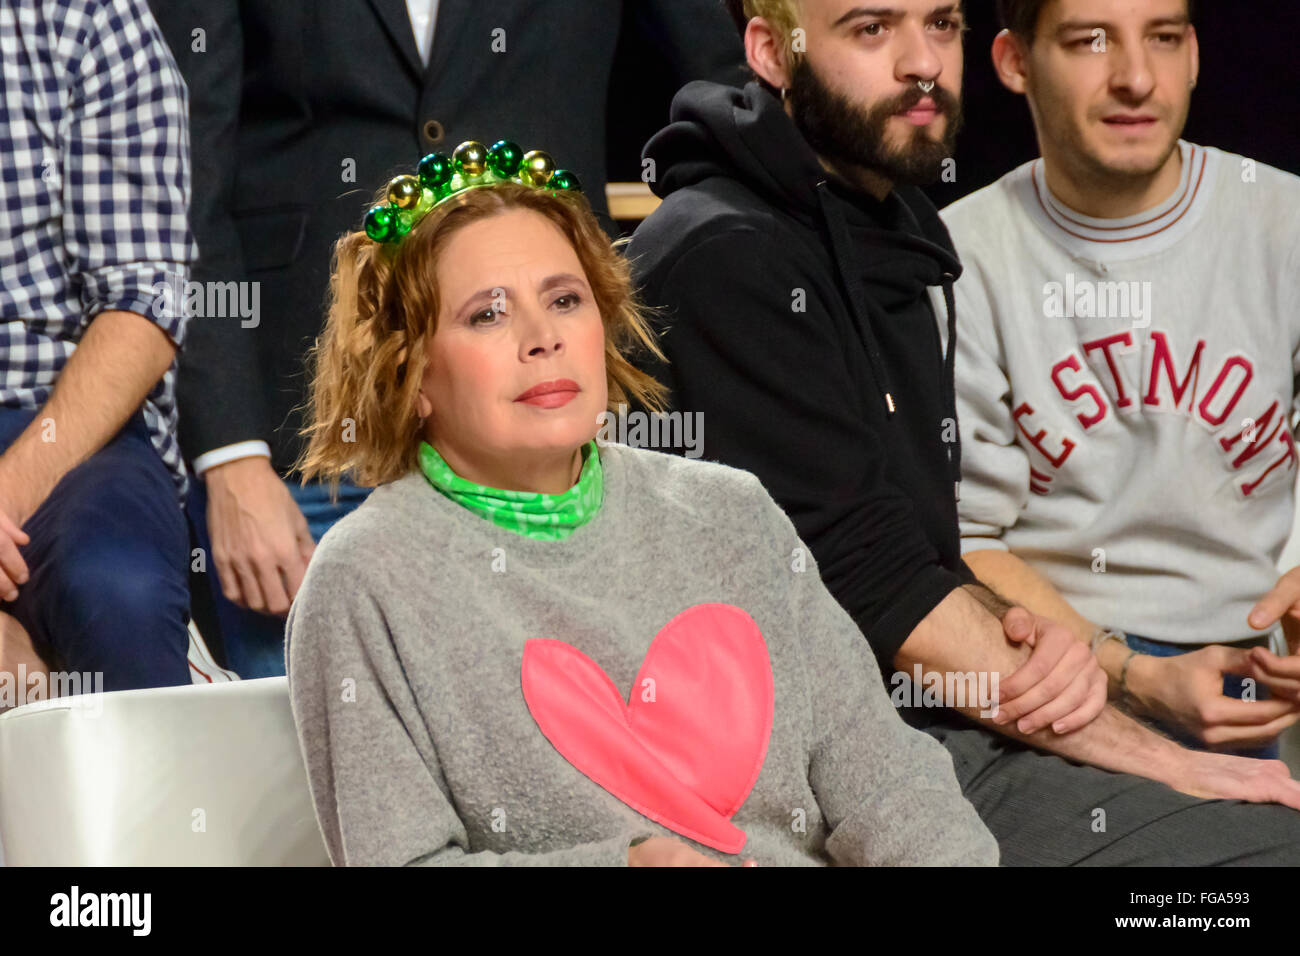 18th February 2016 Madrid, Spain. Agatha Ruiz de la Prada   sitting at the front row of the group photo. An informal presentation of the fashion designers participating in the Mercedes Benz Fashion Week Madrid 2016 was held at Hall 14.1 at IFEMA Madrid, Spain.  © Lawrence JC Baron/Alamy Live News. Stock Photo